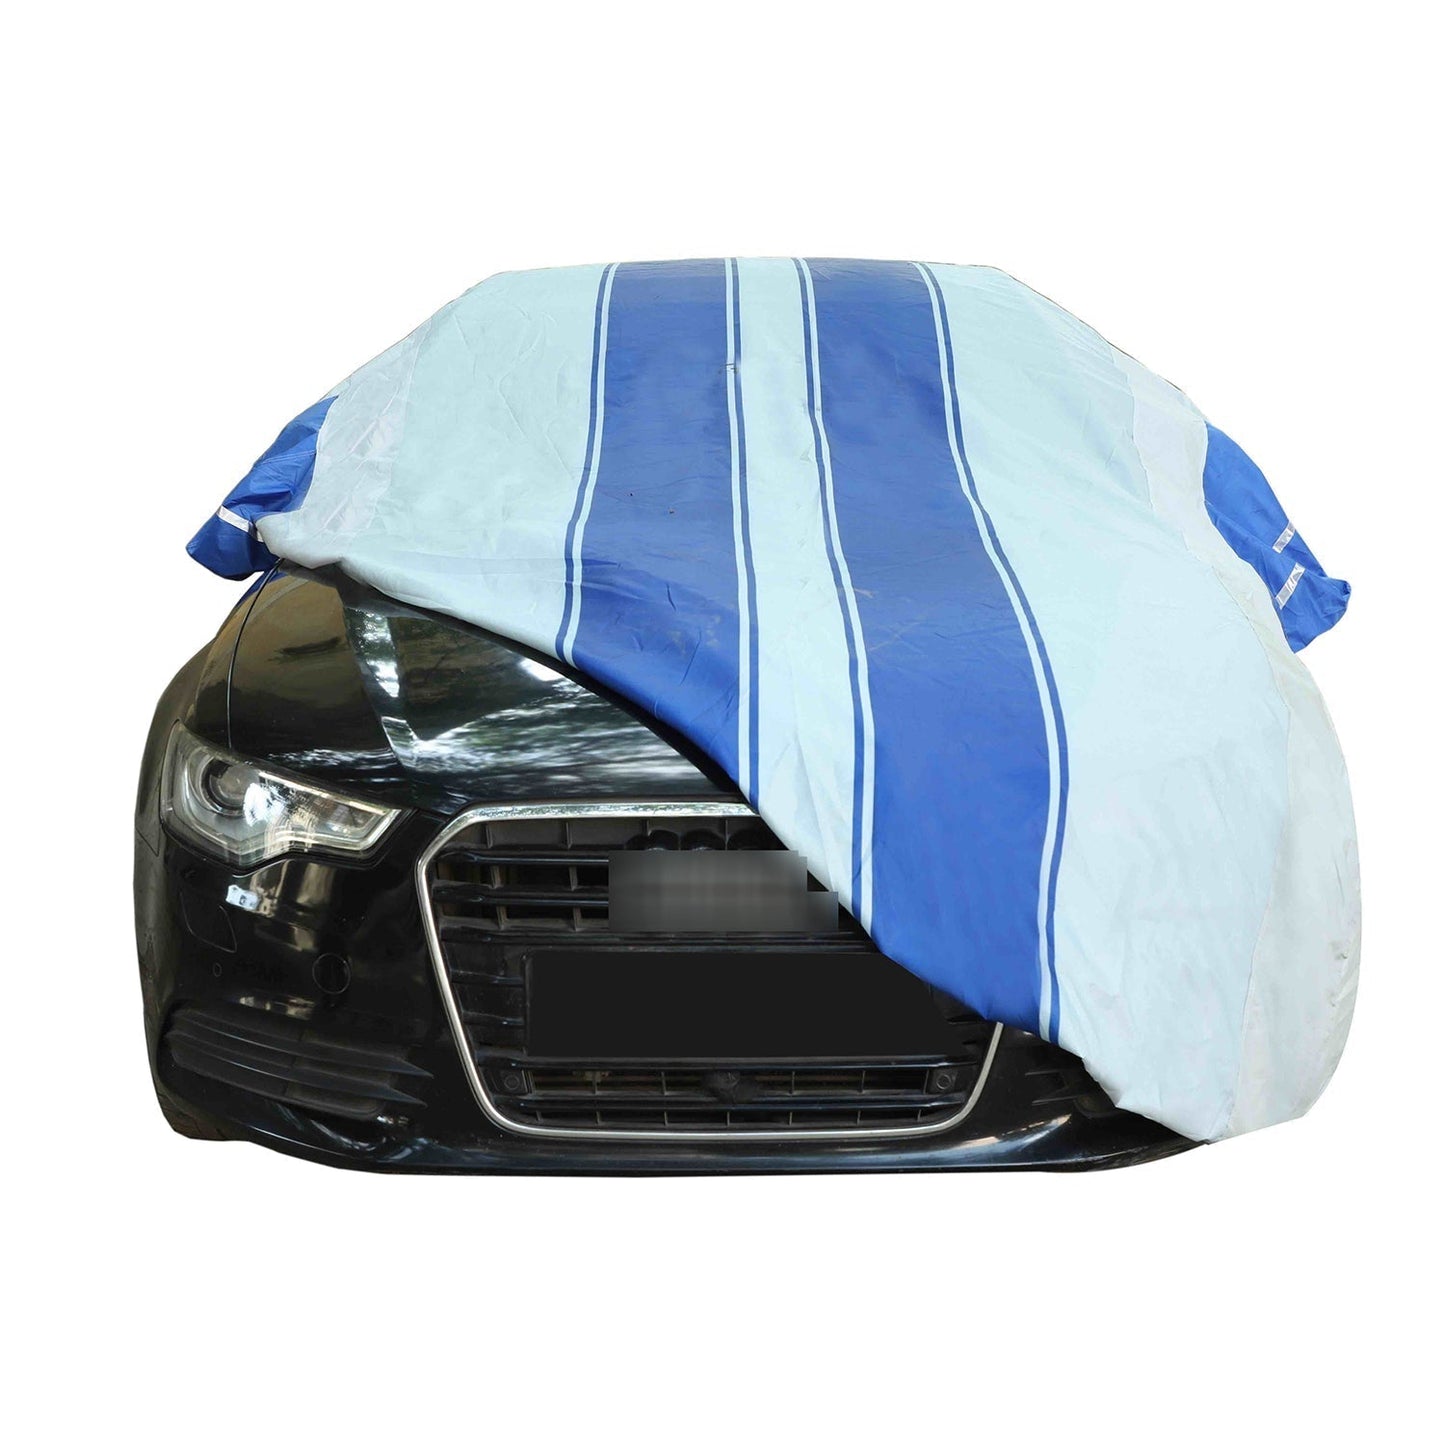 Oshotto 100% Blue dustproof and Water Resistant Car Body Cover with Mirror Pockets For Tata Nano